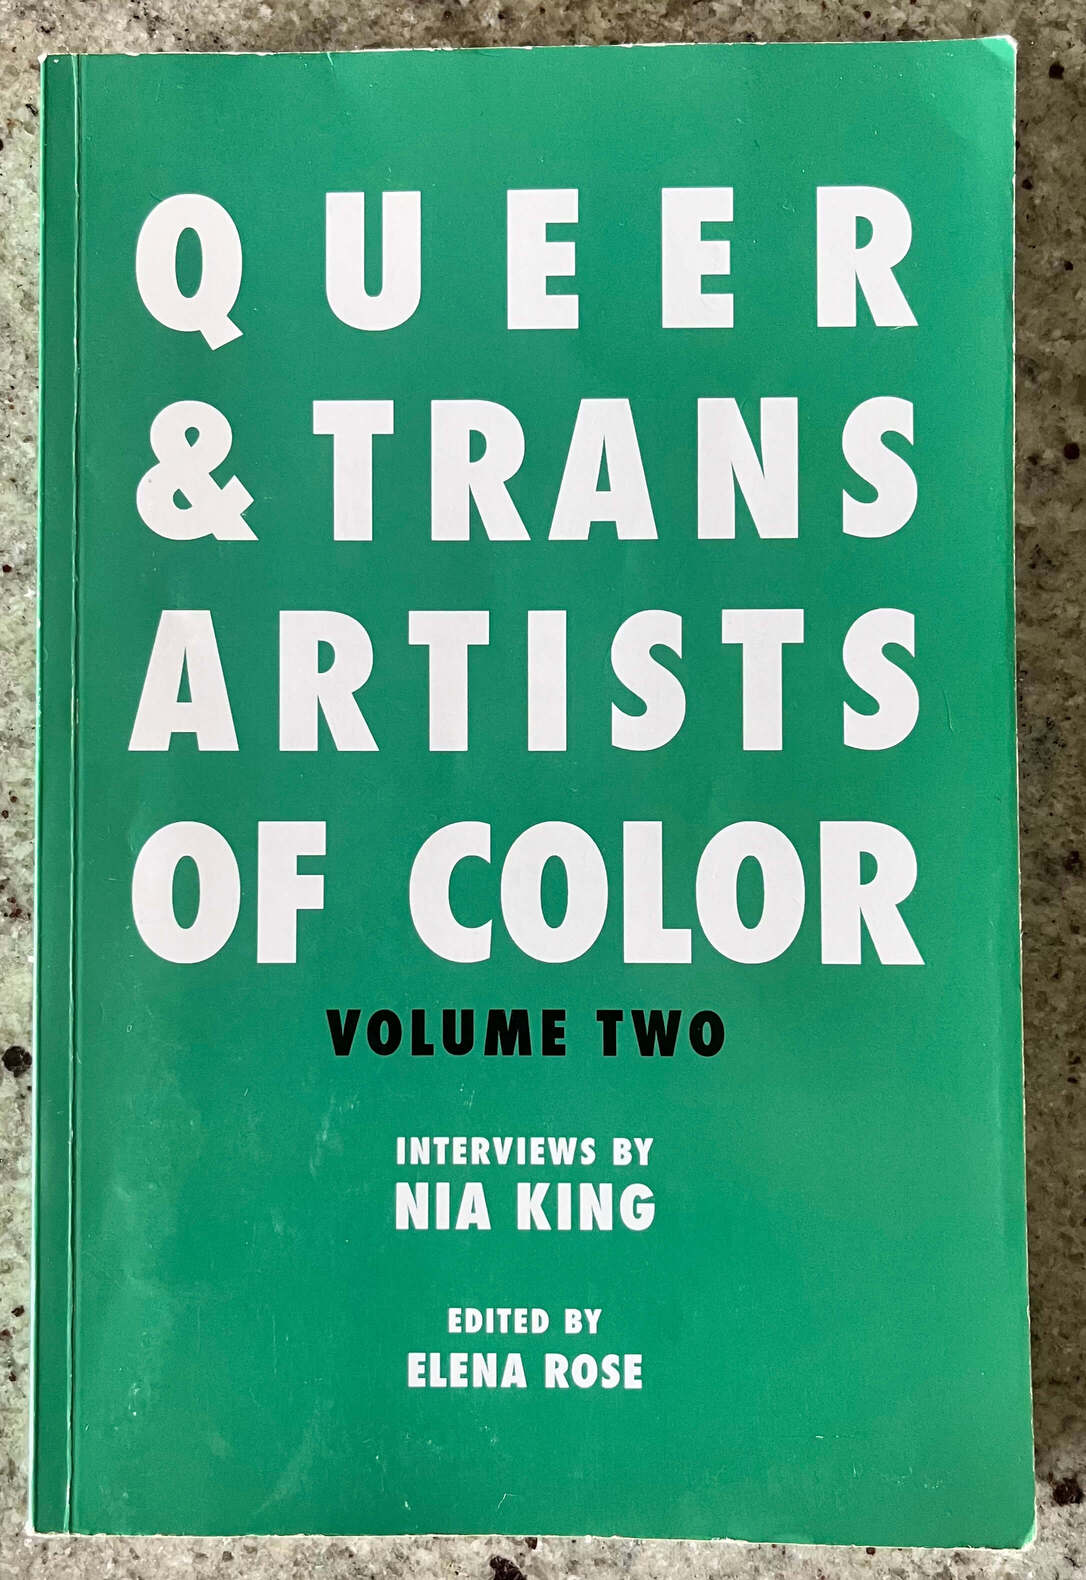 “Queer & Trans Artists Of Color: Volume Two” Interviews by Nia King Edited by Elena Rose.